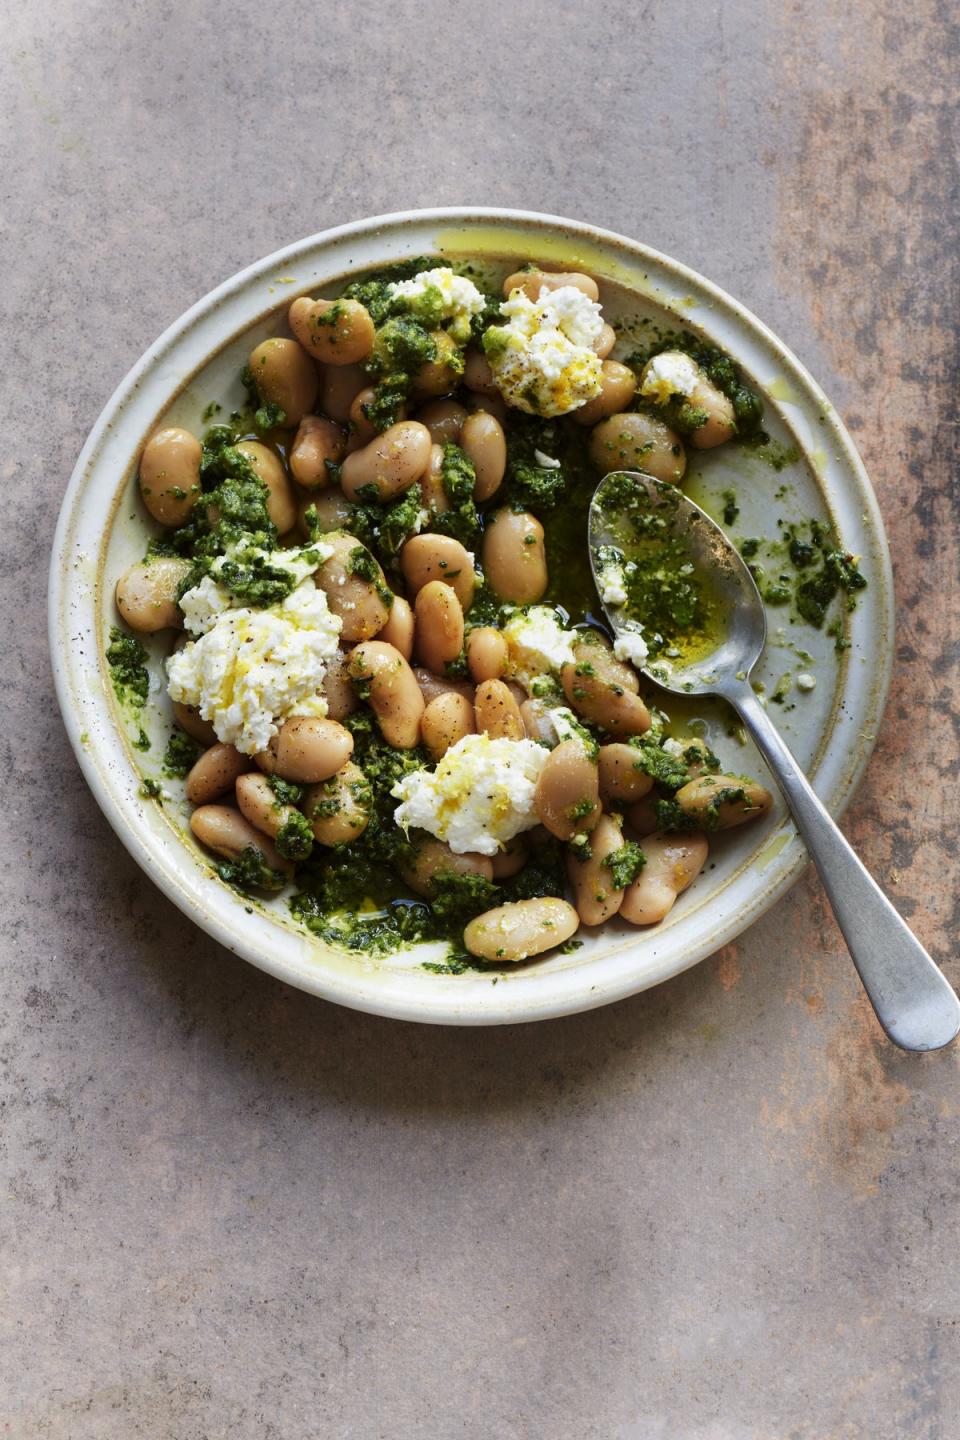 These ricotta and pesto butter beans make for a speedy weeknight dinner (Joe Woodhouse)